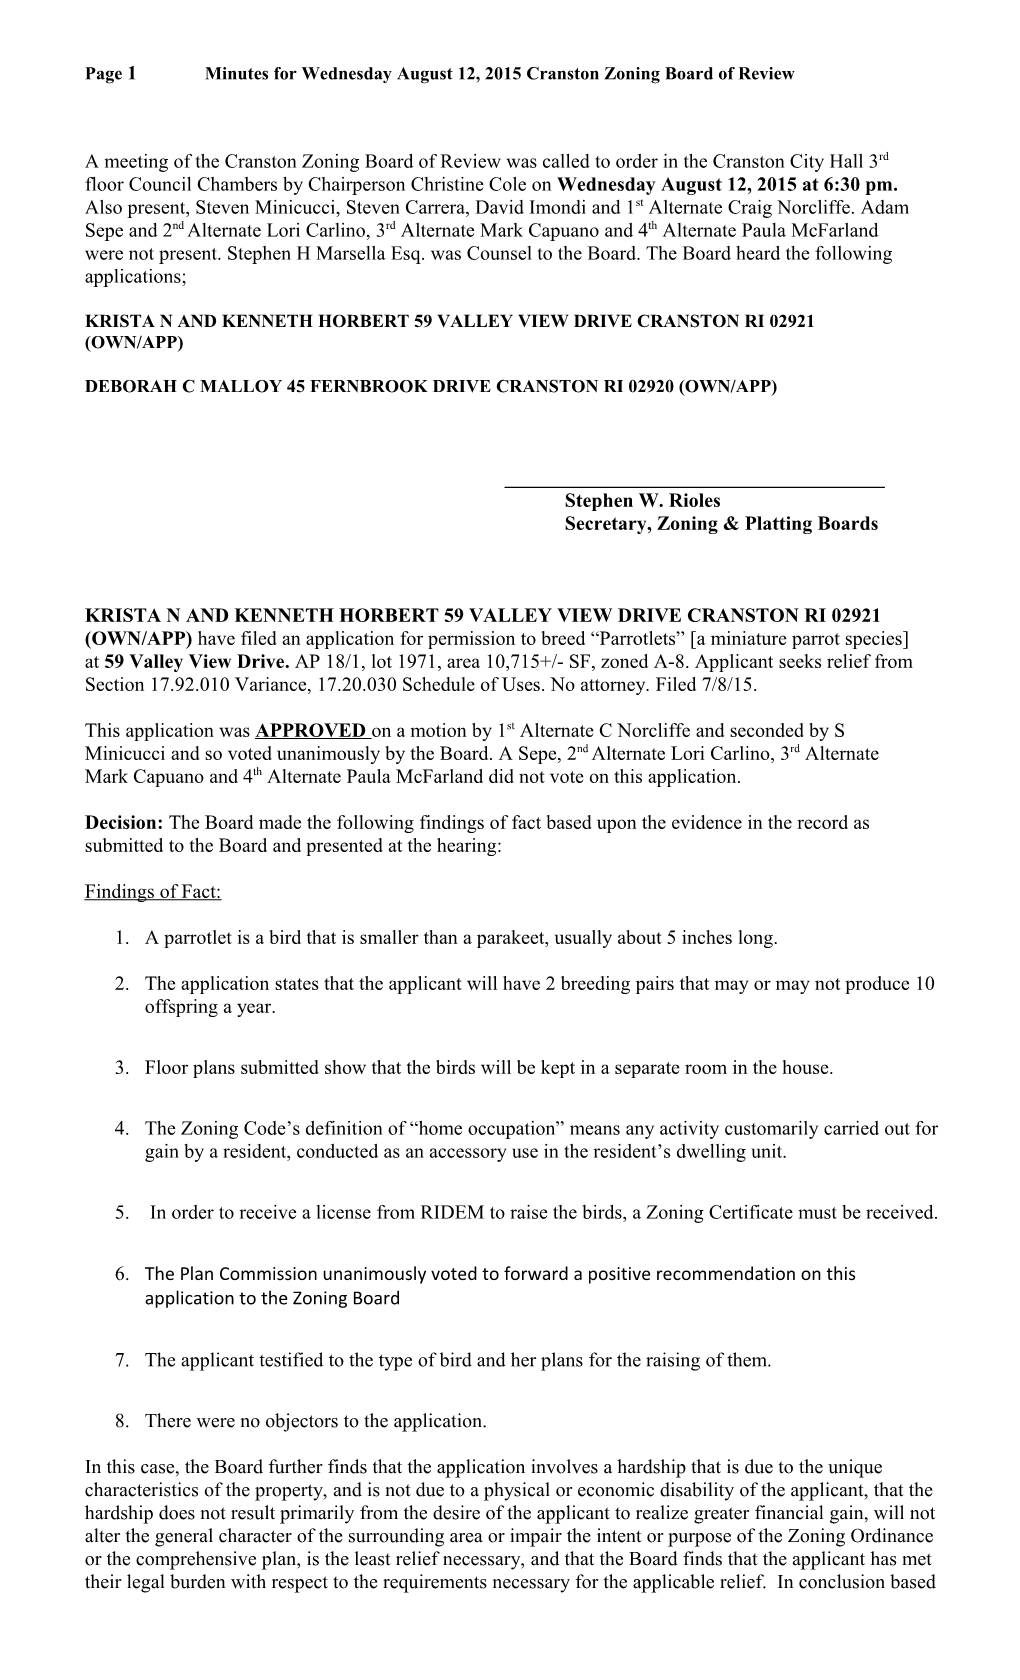 Page 1Minutes for Wednesdayaugust 12, 2015Cranston Zoning Board of Review